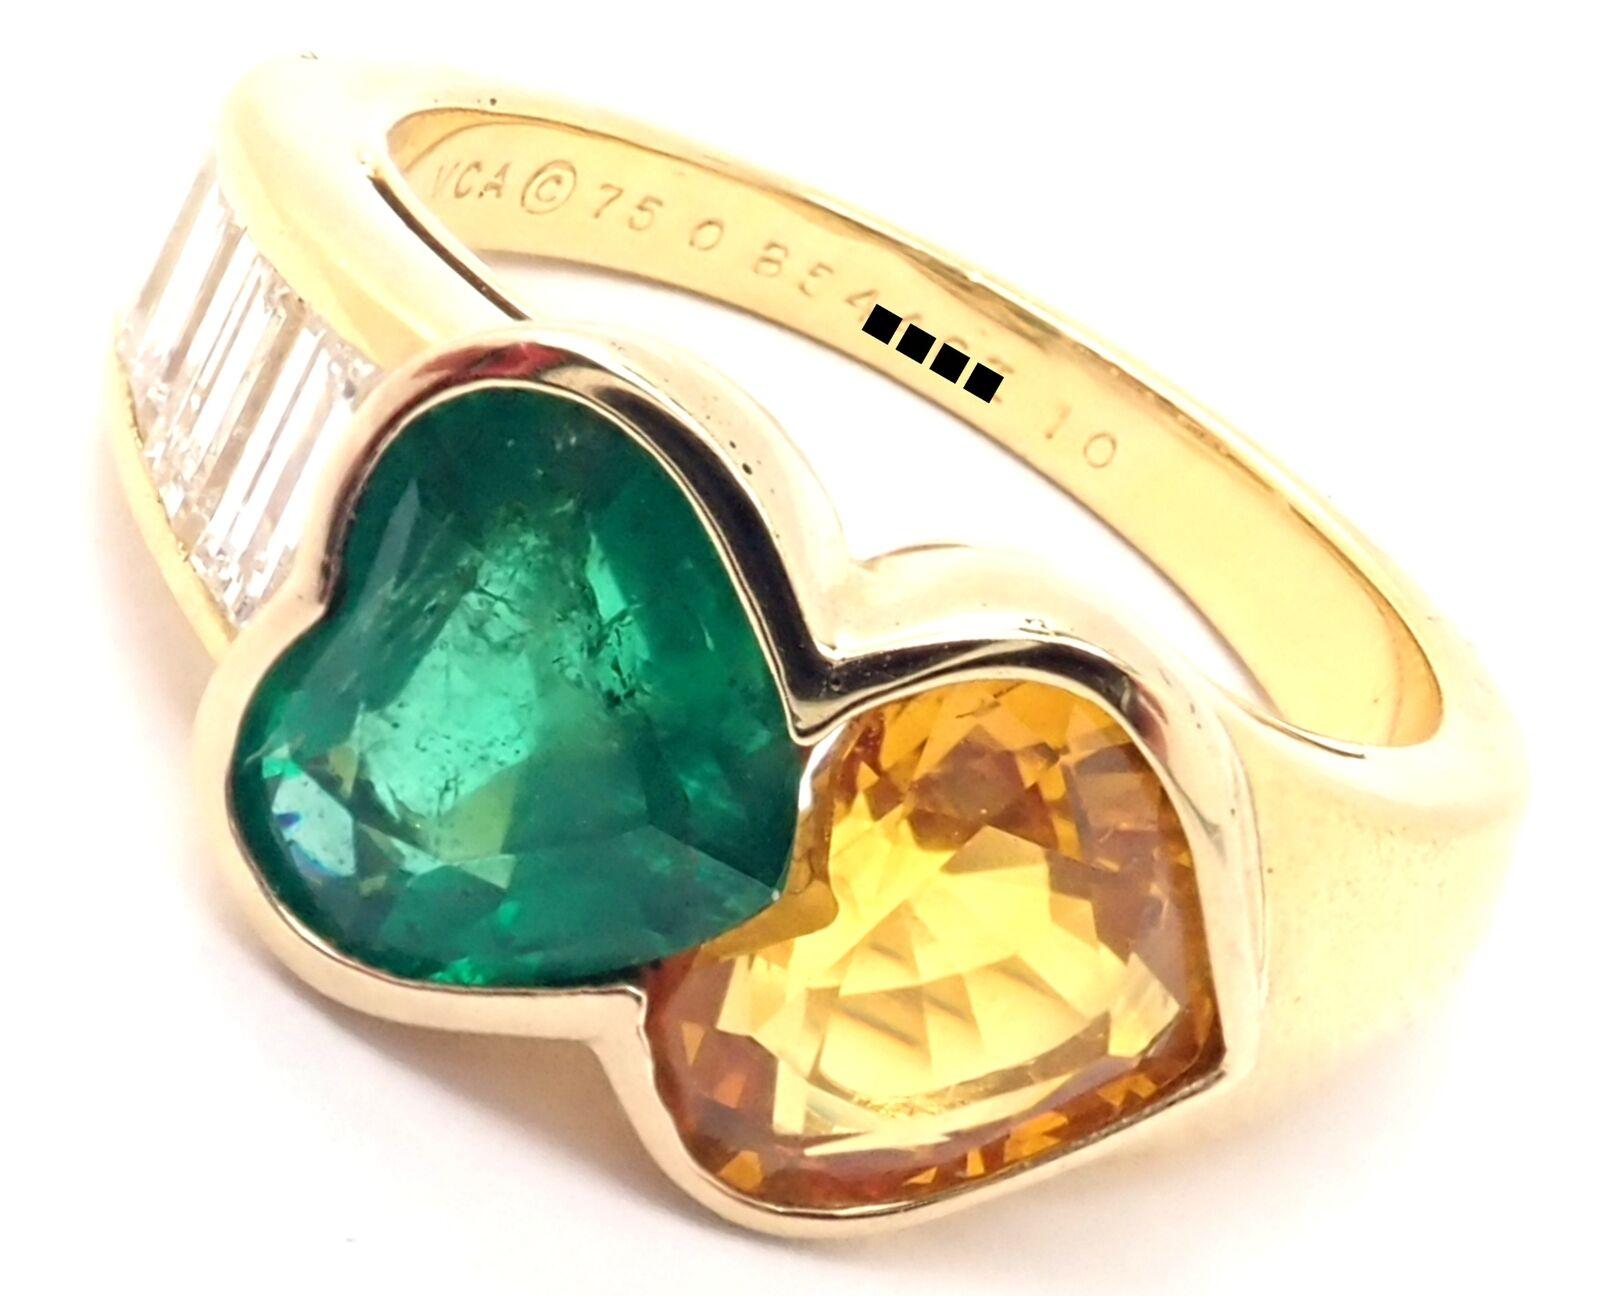 18k Yellow Gold Diamond, Emerald and Yellow Sapphire Band Ring by Van Cleef & Arpels. 
With 7 emerald cut diamonds, VVS1 Clarity, G Color. Total Diamond Weight approx. .50ct. 
1 Heart Shape Emerald Stone total weight 1.5ct
1 Heart Shape Yellow